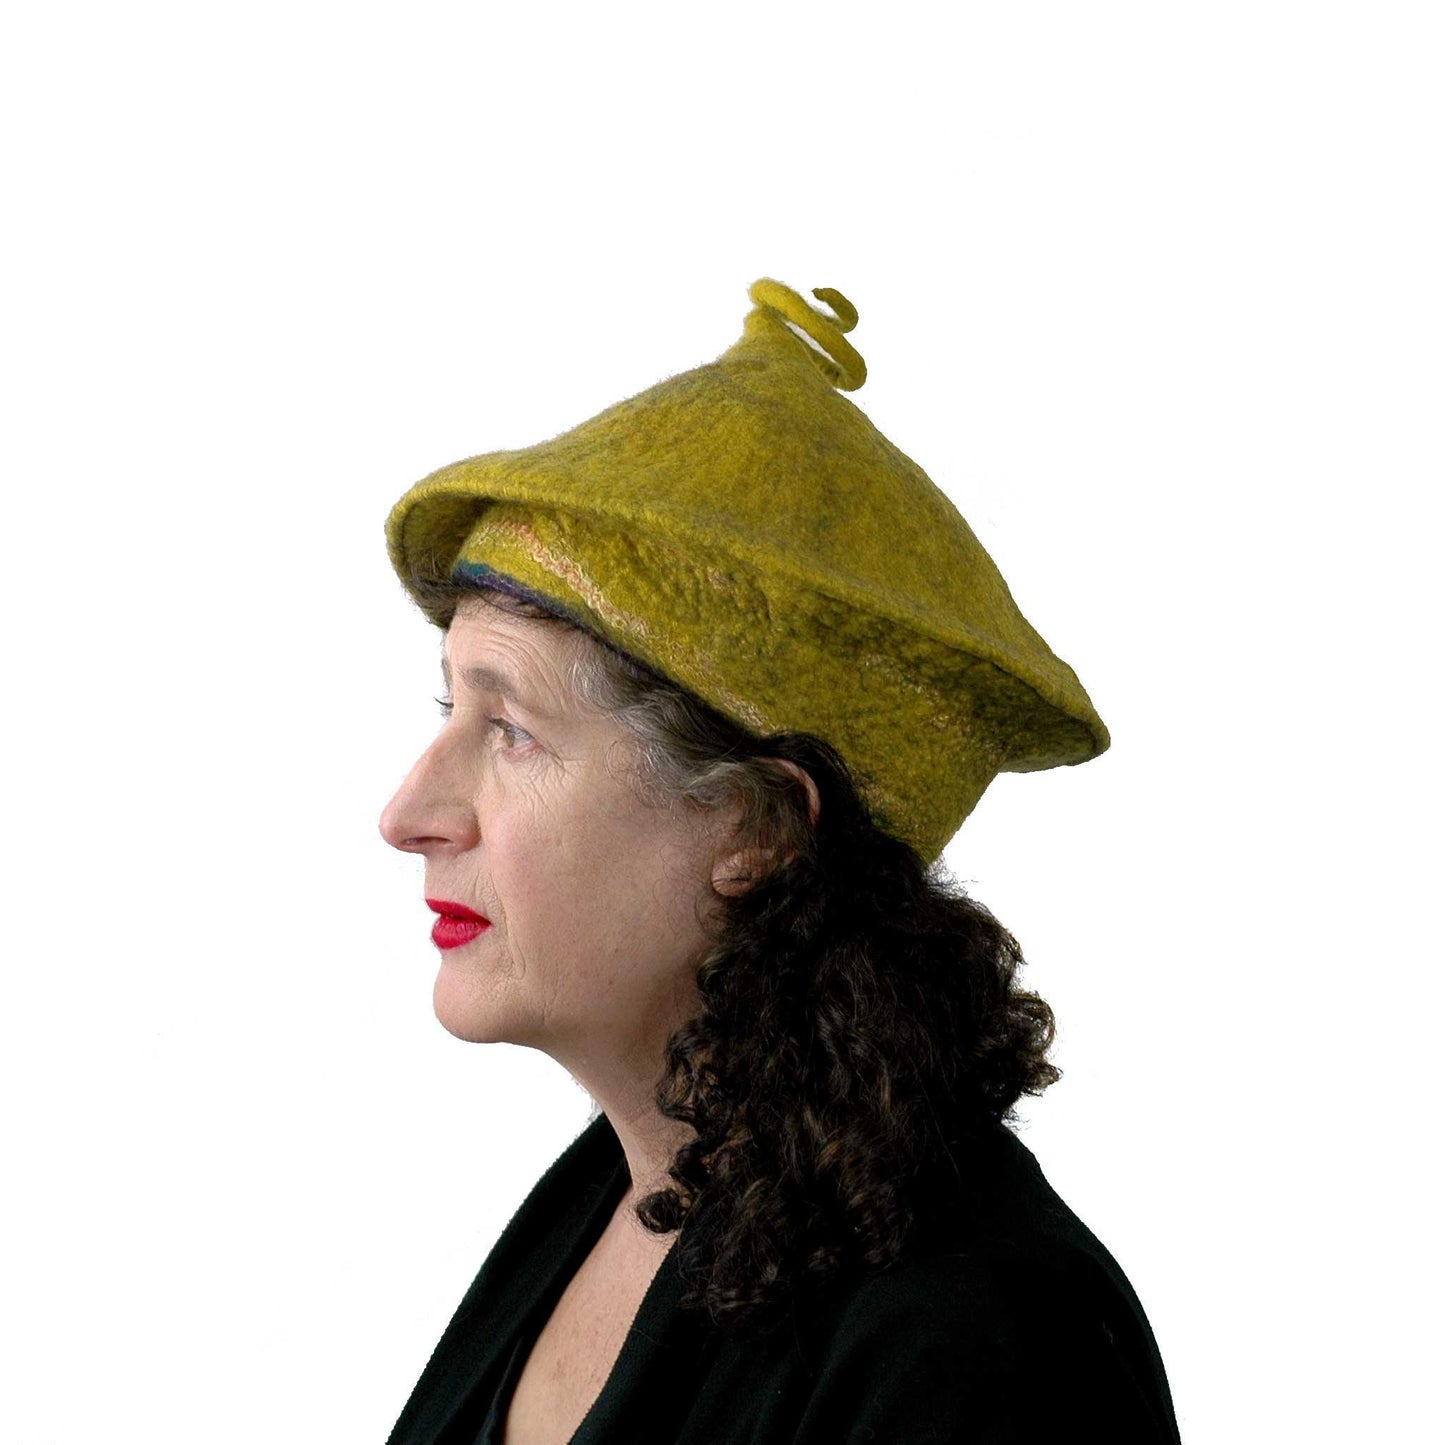 Conical Hat in Mustard Yellow - Medium Small Size  - side view